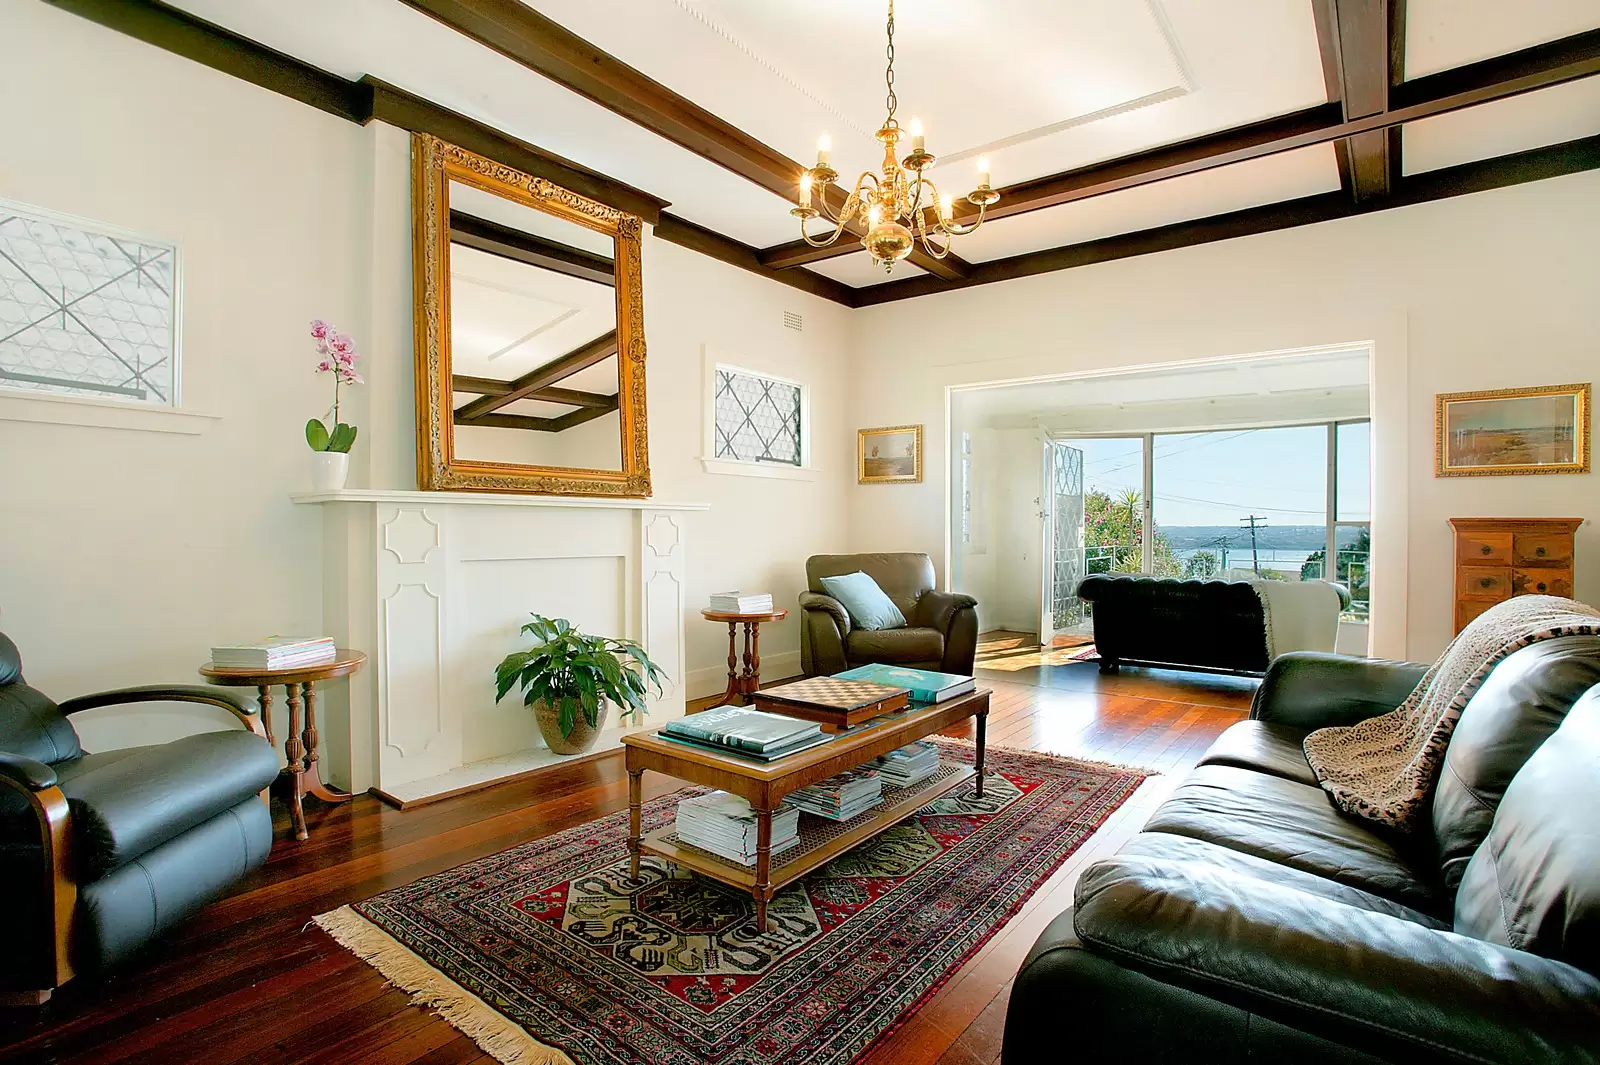 Photo #4: 15 Olphert Avenue, Vaucluse - Sold by Sydney Sotheby's International Realty